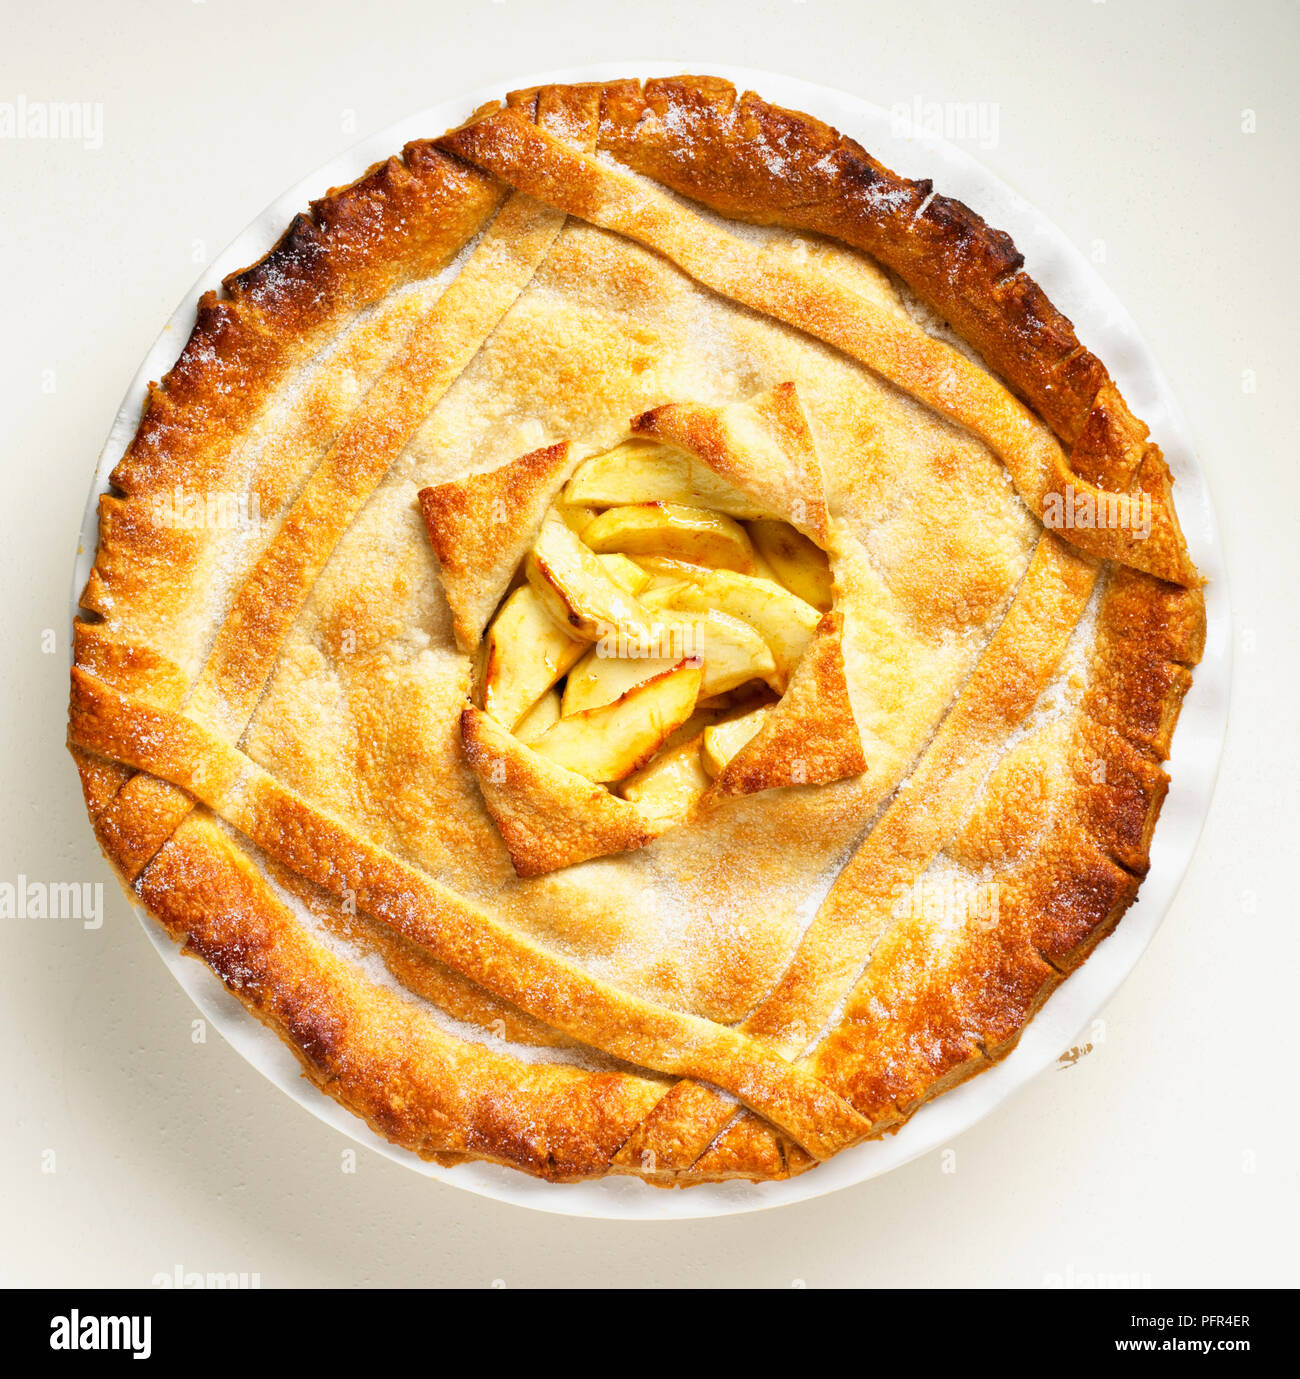 Apple pie with hole in the middle of the crust showing the filling Stock Photo